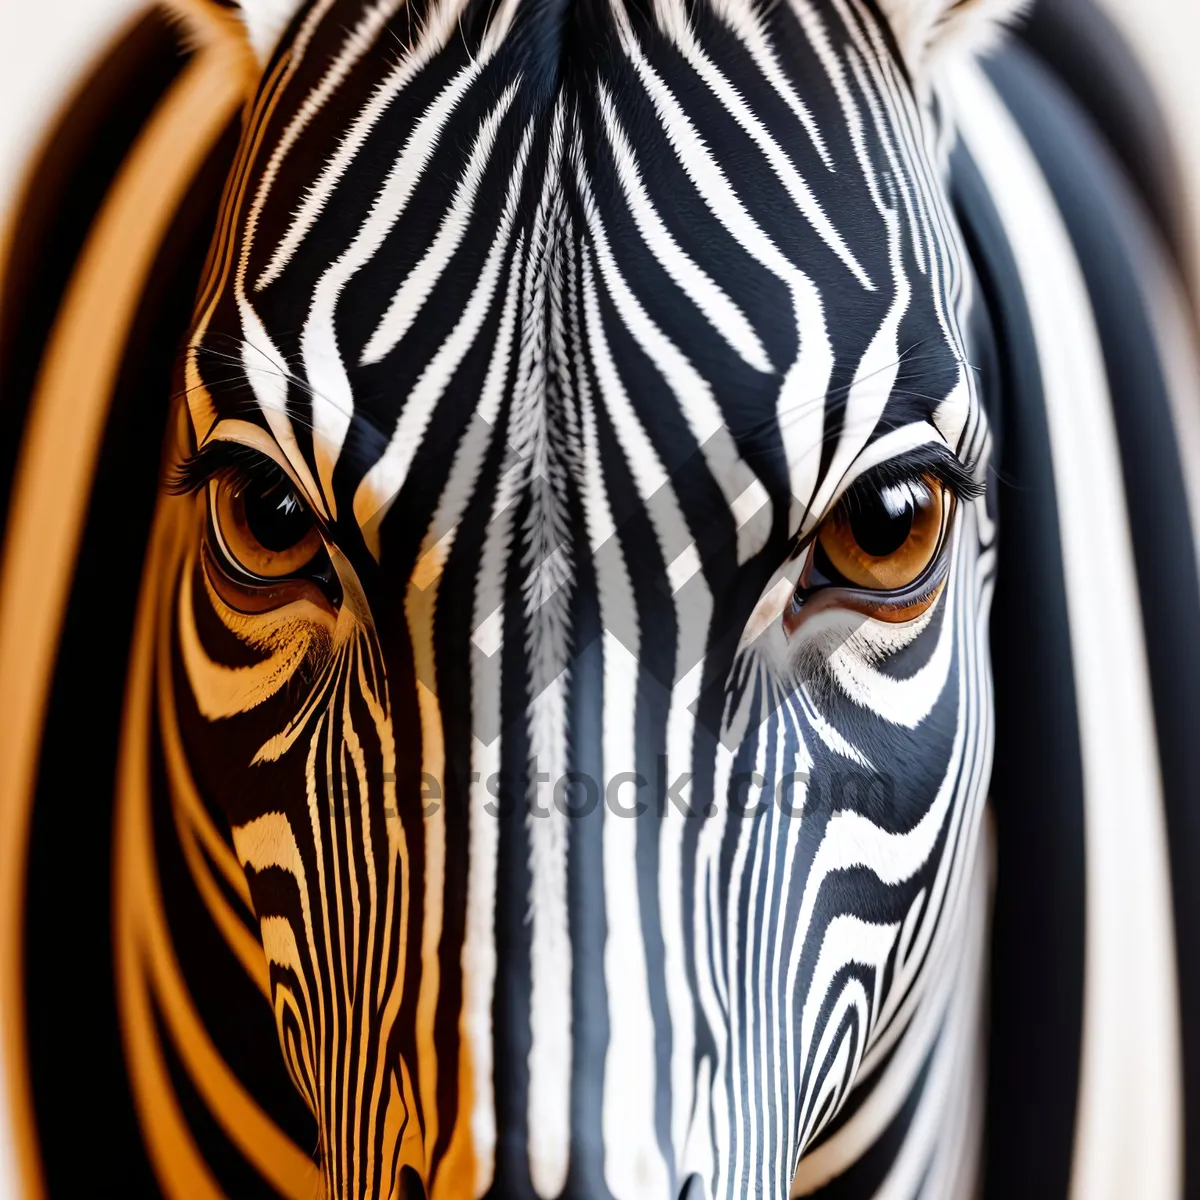 Picture of Striped Zebra Drinking from Pitcher-Like Vessel